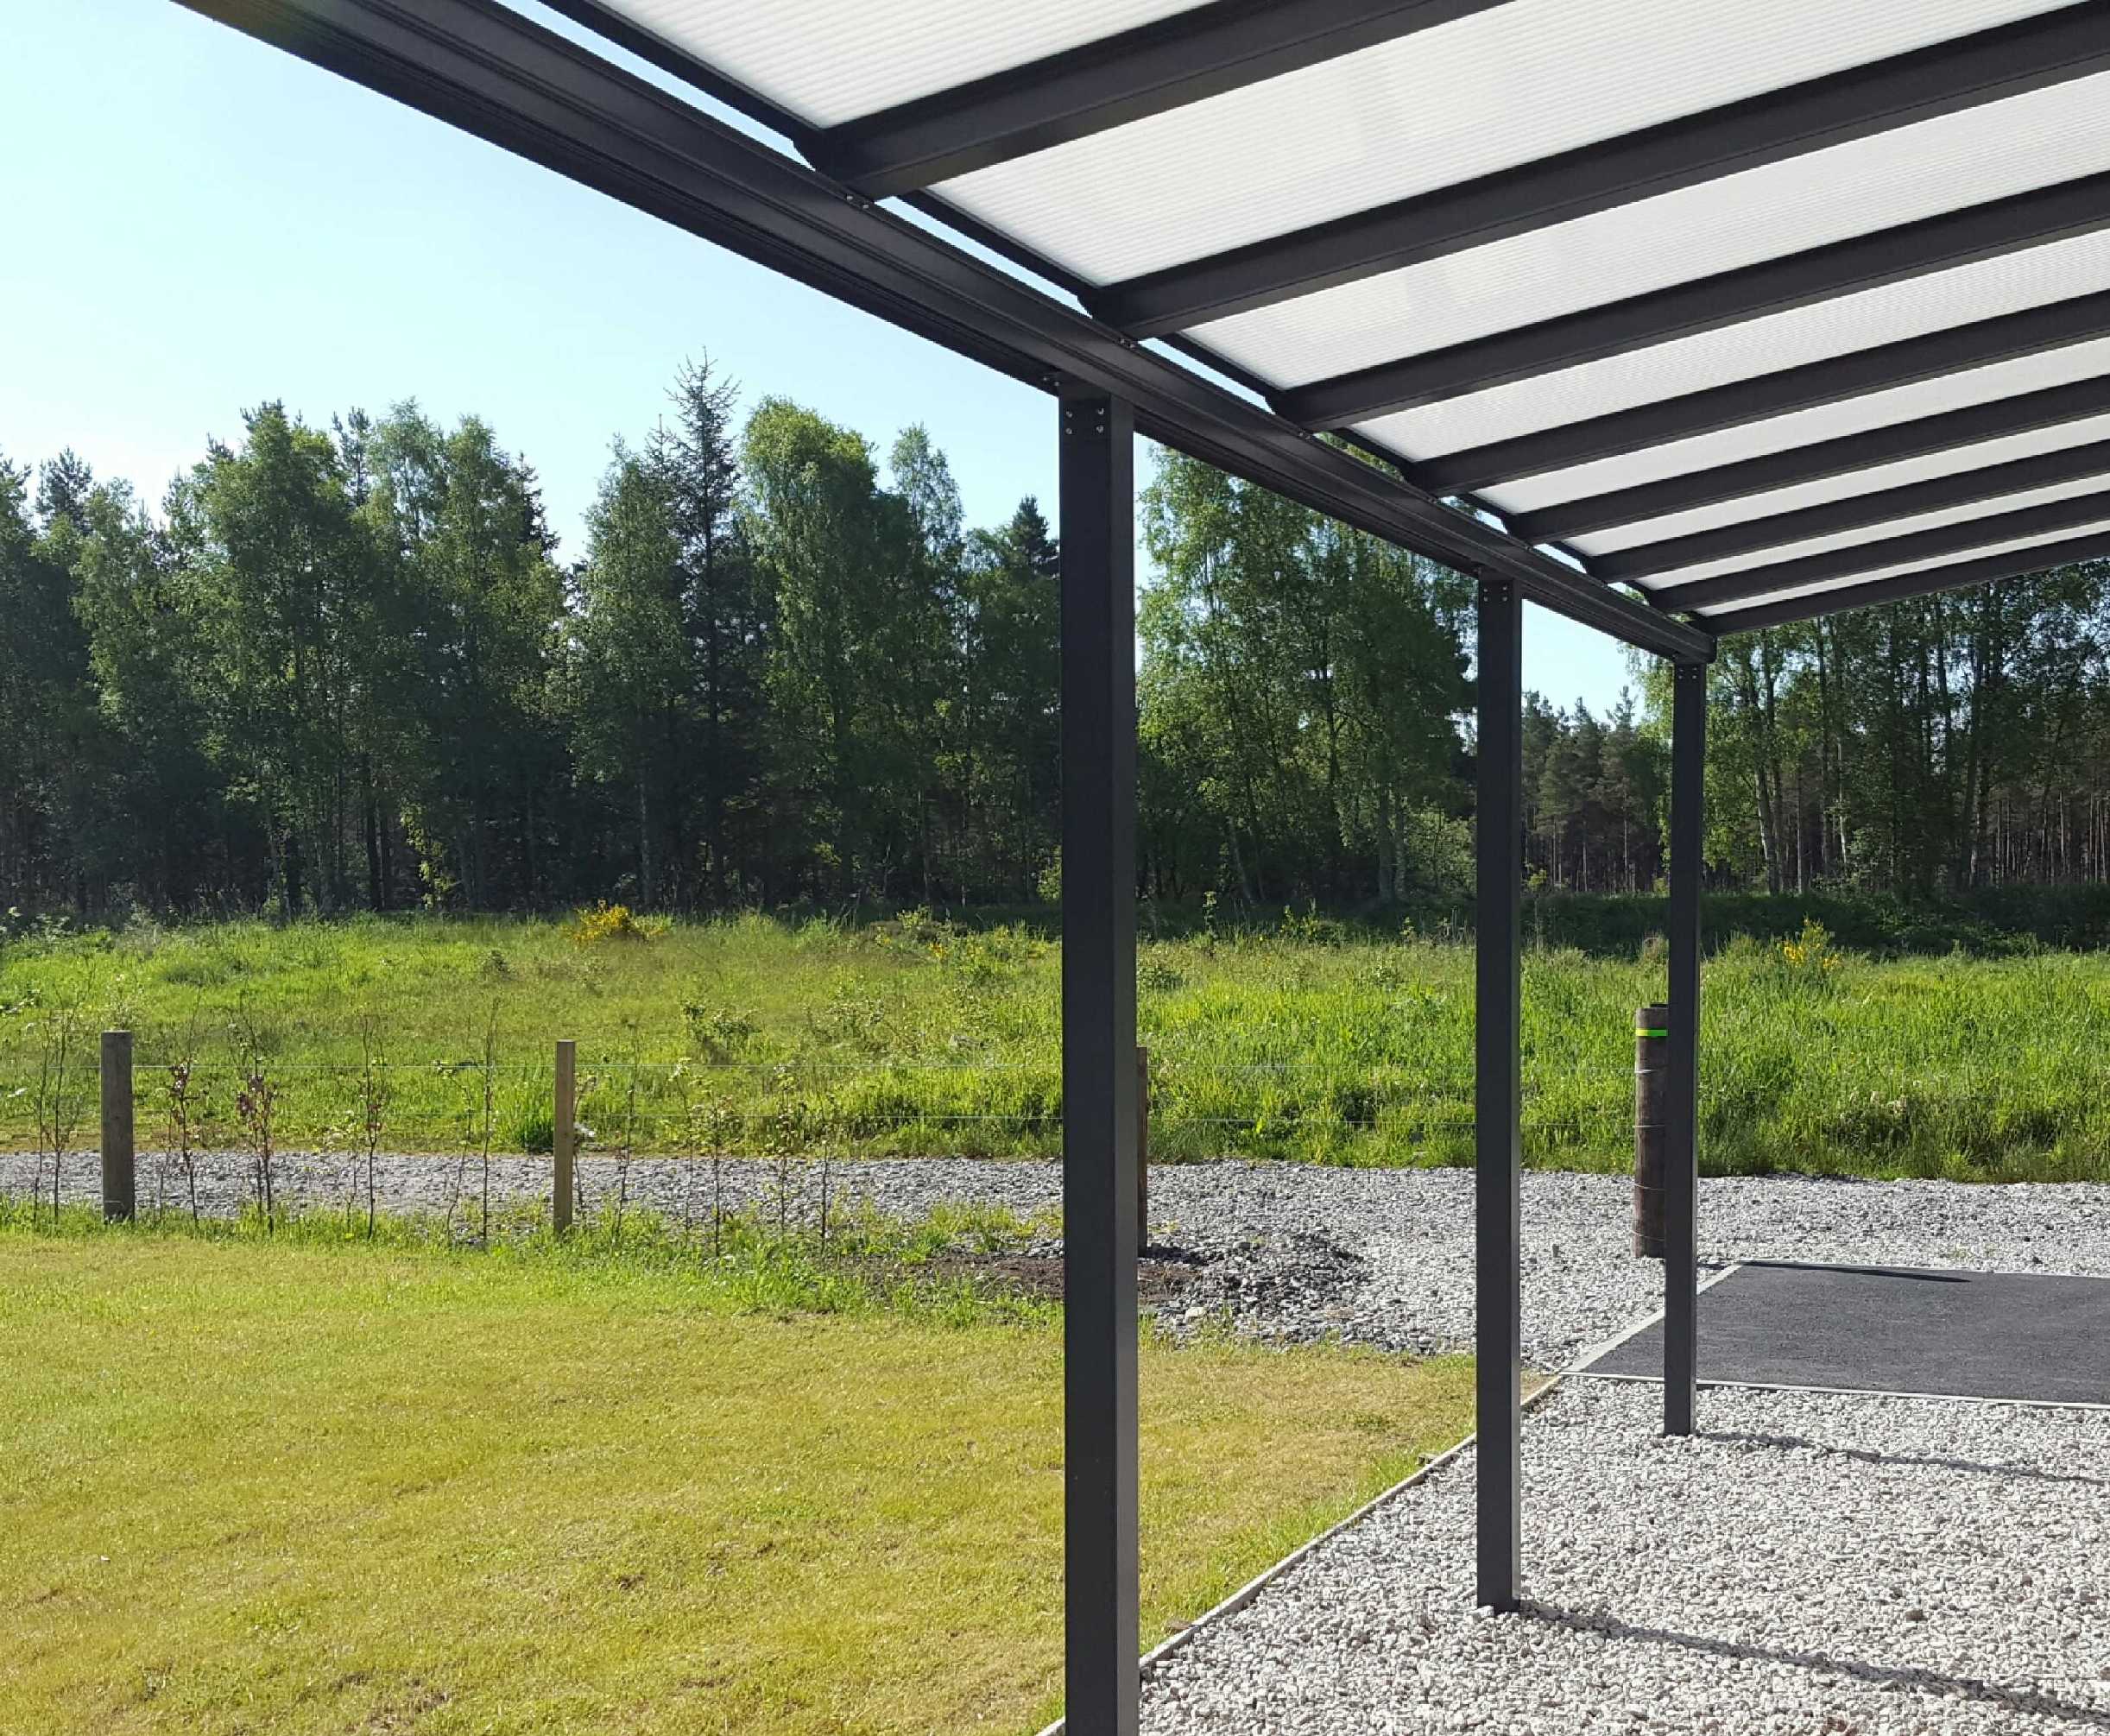 Omega Smart Lean-To Canopy, Anthracite Grey, UNGLAZED for 6mm Glazing - 9.1m (W) x 2.0m (P), (5) Supporting Posts